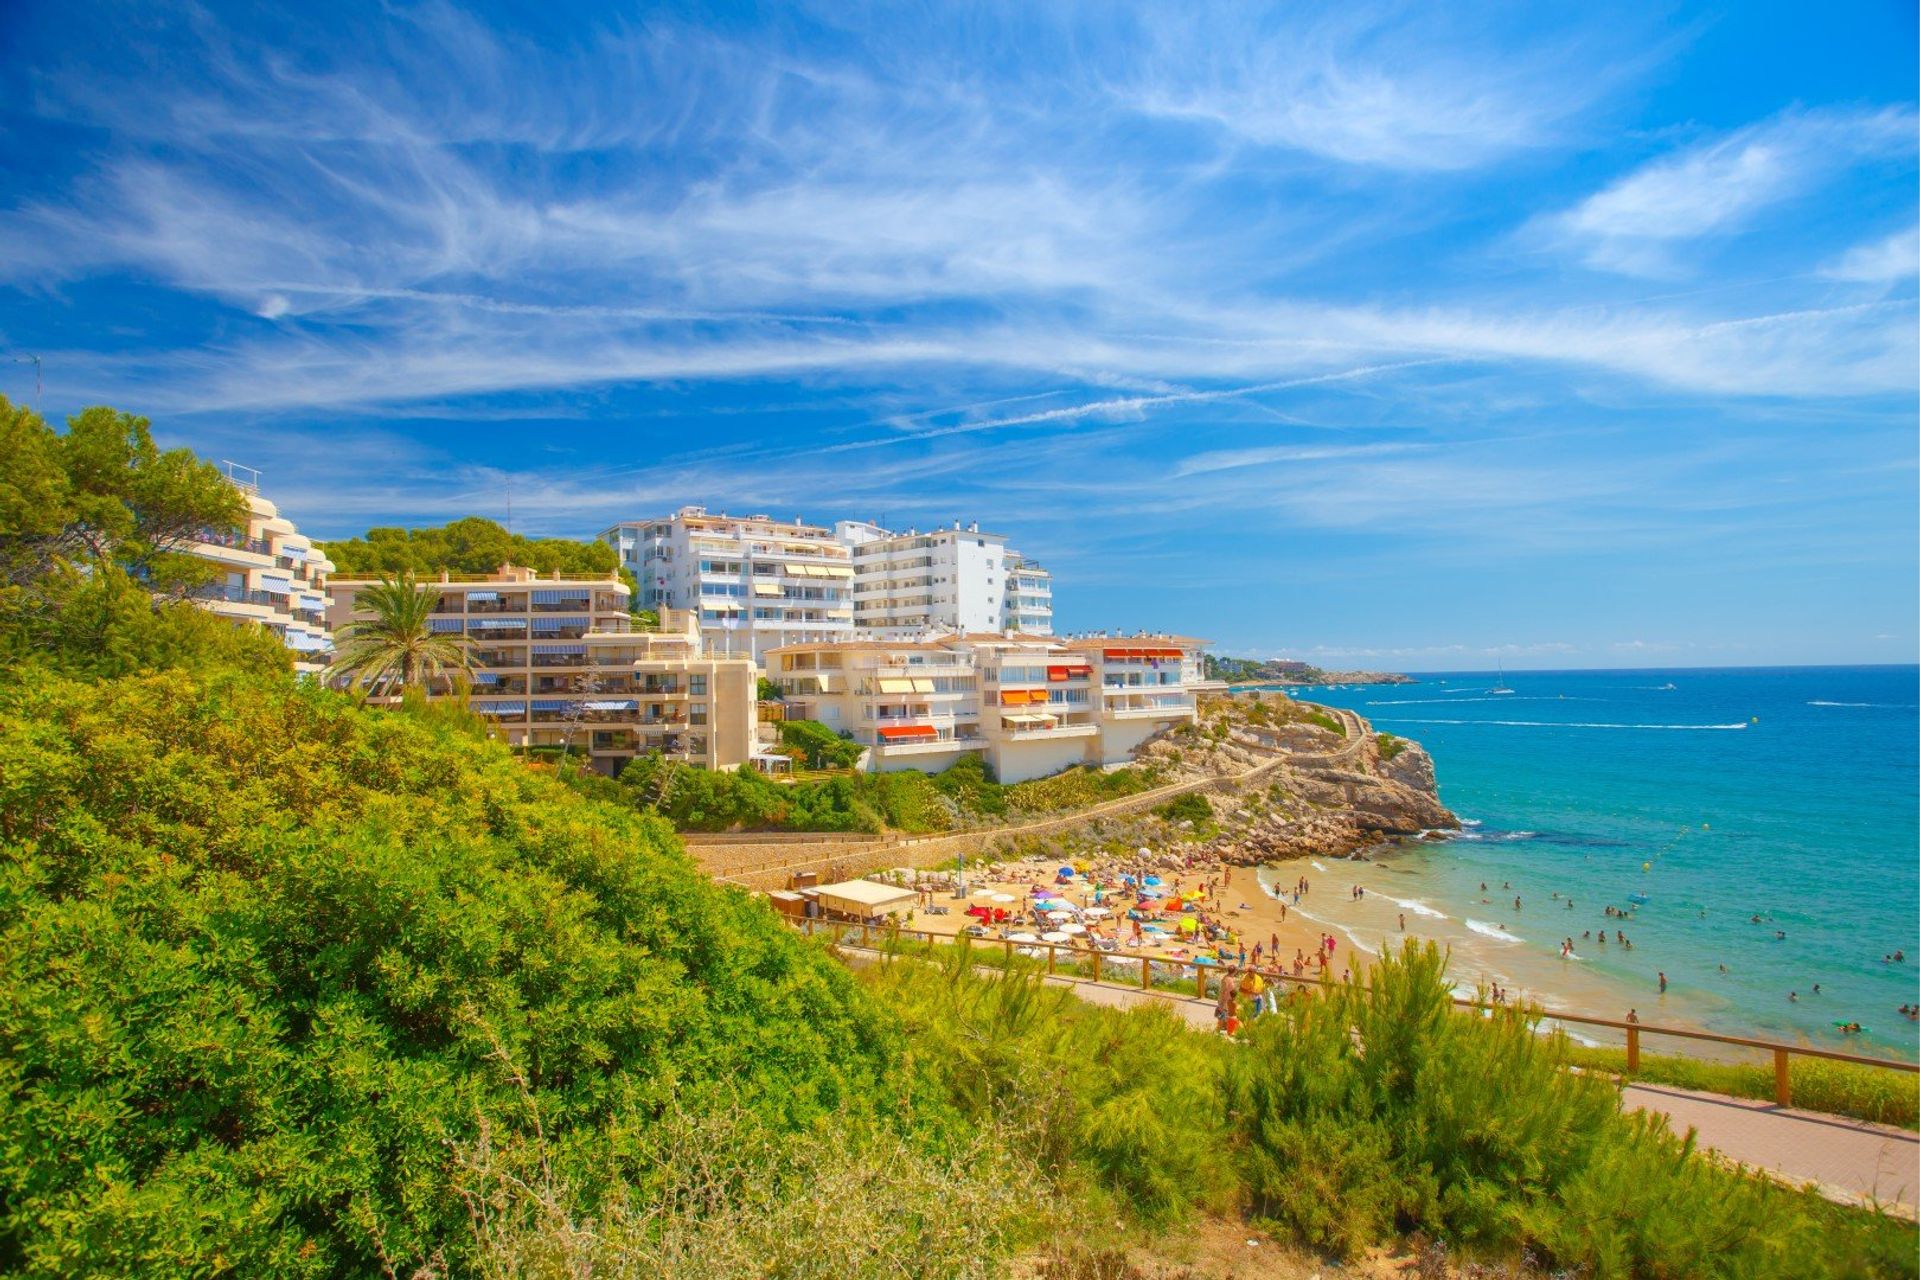 Cityscape of Salou and its surrounding green landscape